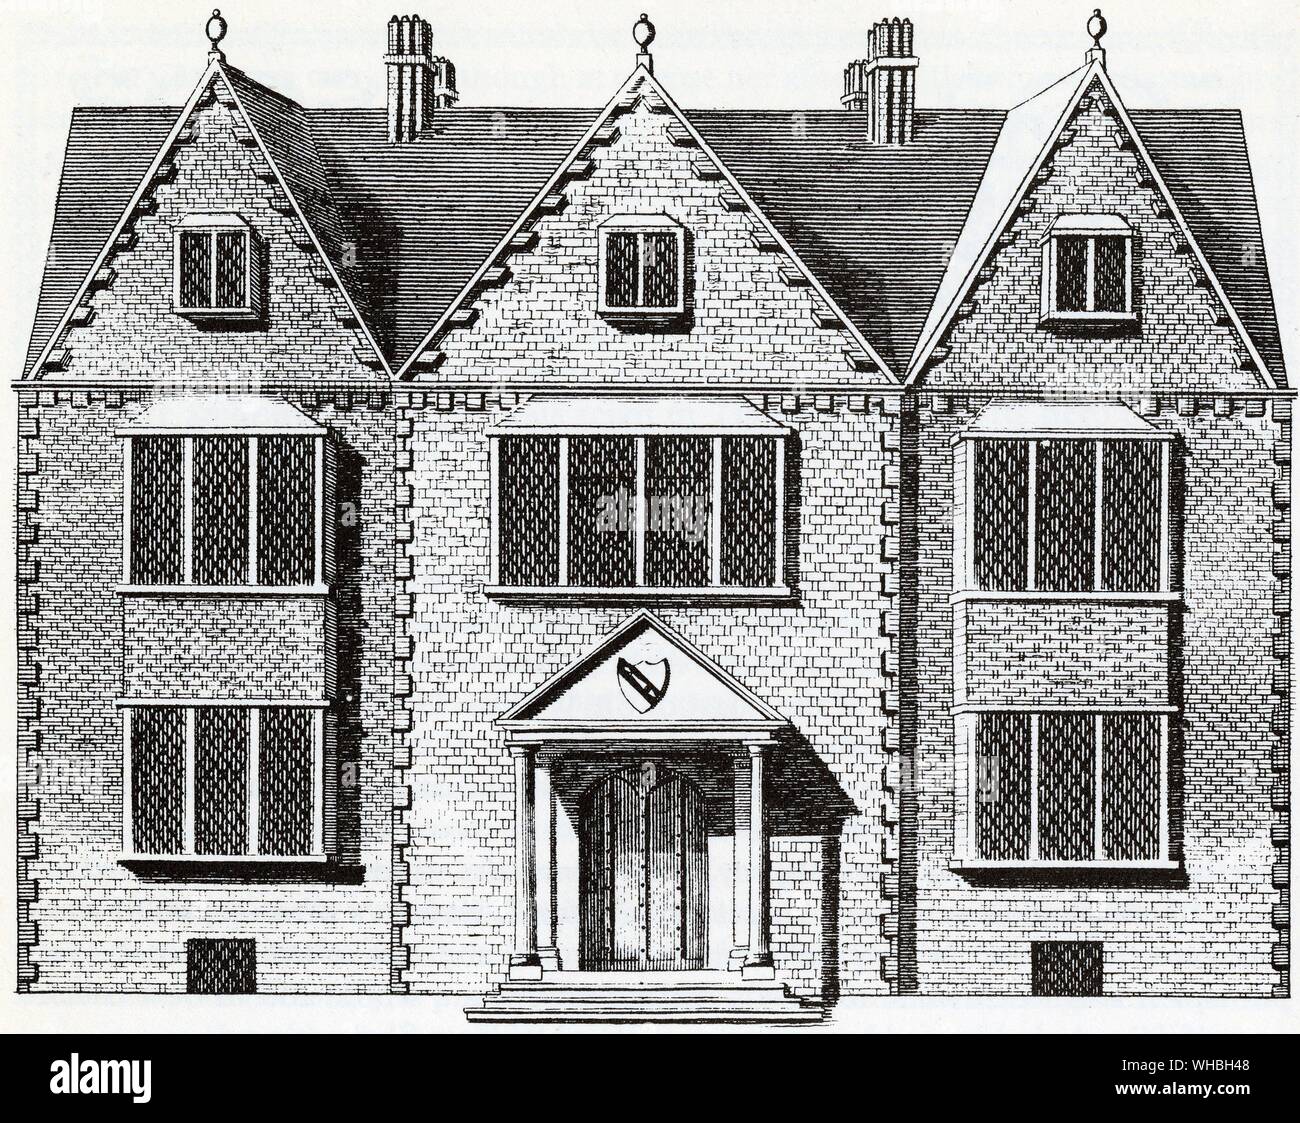 Except for the crest, this drawing made 'in the Margin of an Ancient Survey' presents Shakespeare's house, New Place, as it may well have looked.. New Place is the name given to William Shakespeare's final place of residence in Stratford-upon-Avon during his retirement.. The house rested on Chapel Street. It was built in 1483 by Hugh Clopton, a wealthy merchant and future Lord Mayor of London. Shakespeare bought the house in 1597 for sixty British pounds. Shakespeare was associated with London for much of his life, and tradition states that he retired to Stratford in his later years, though Stock Photo